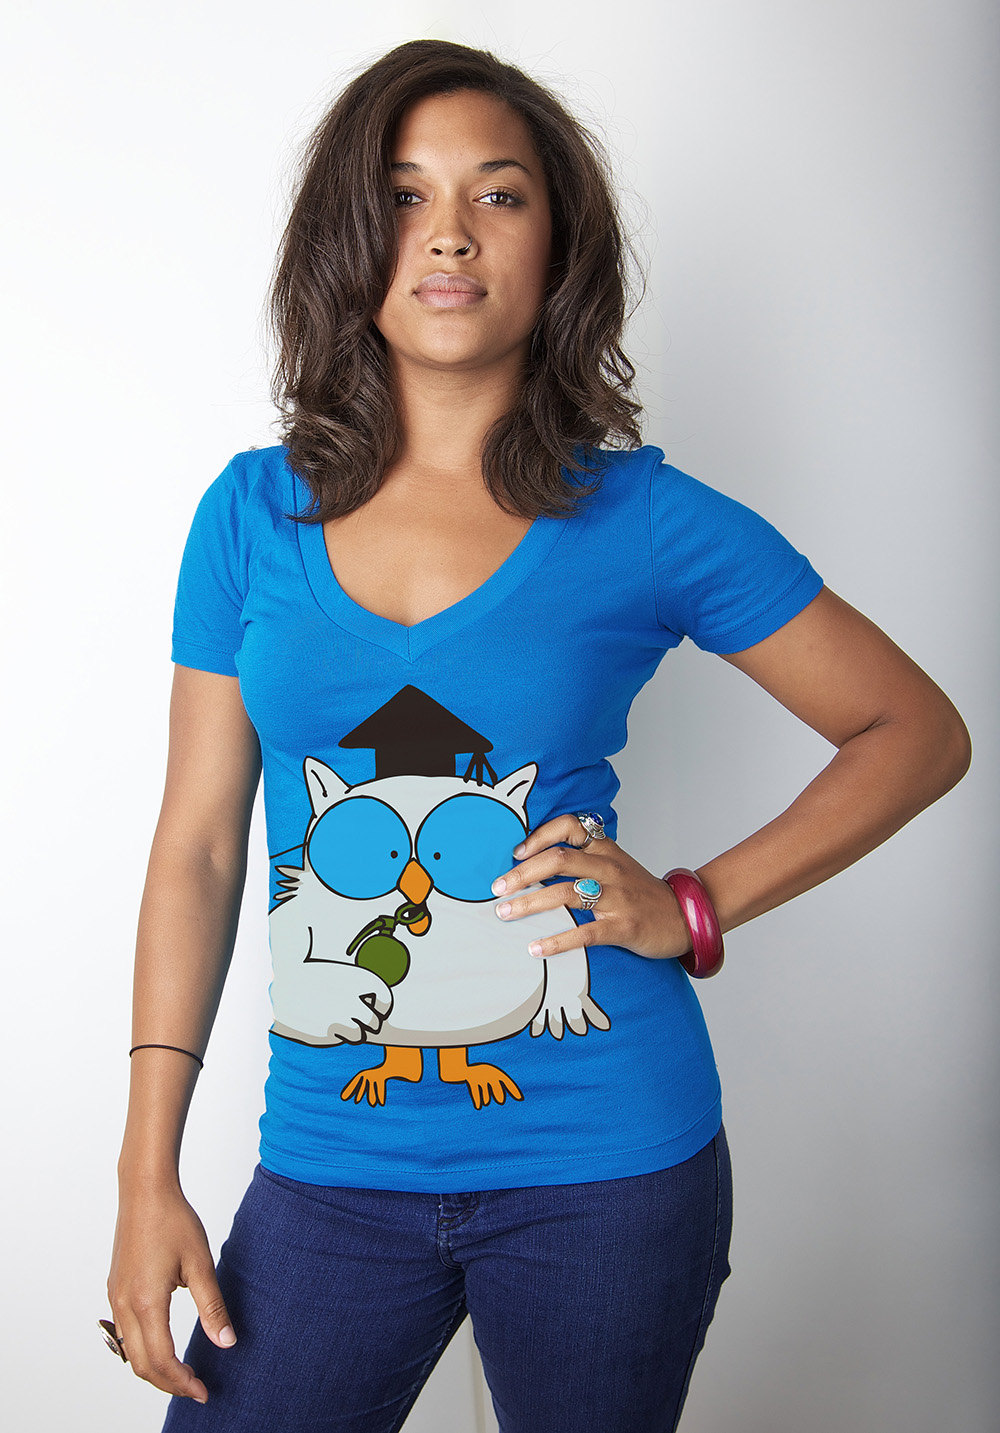 Women's Mr Owl Tshirt Available S-2XL